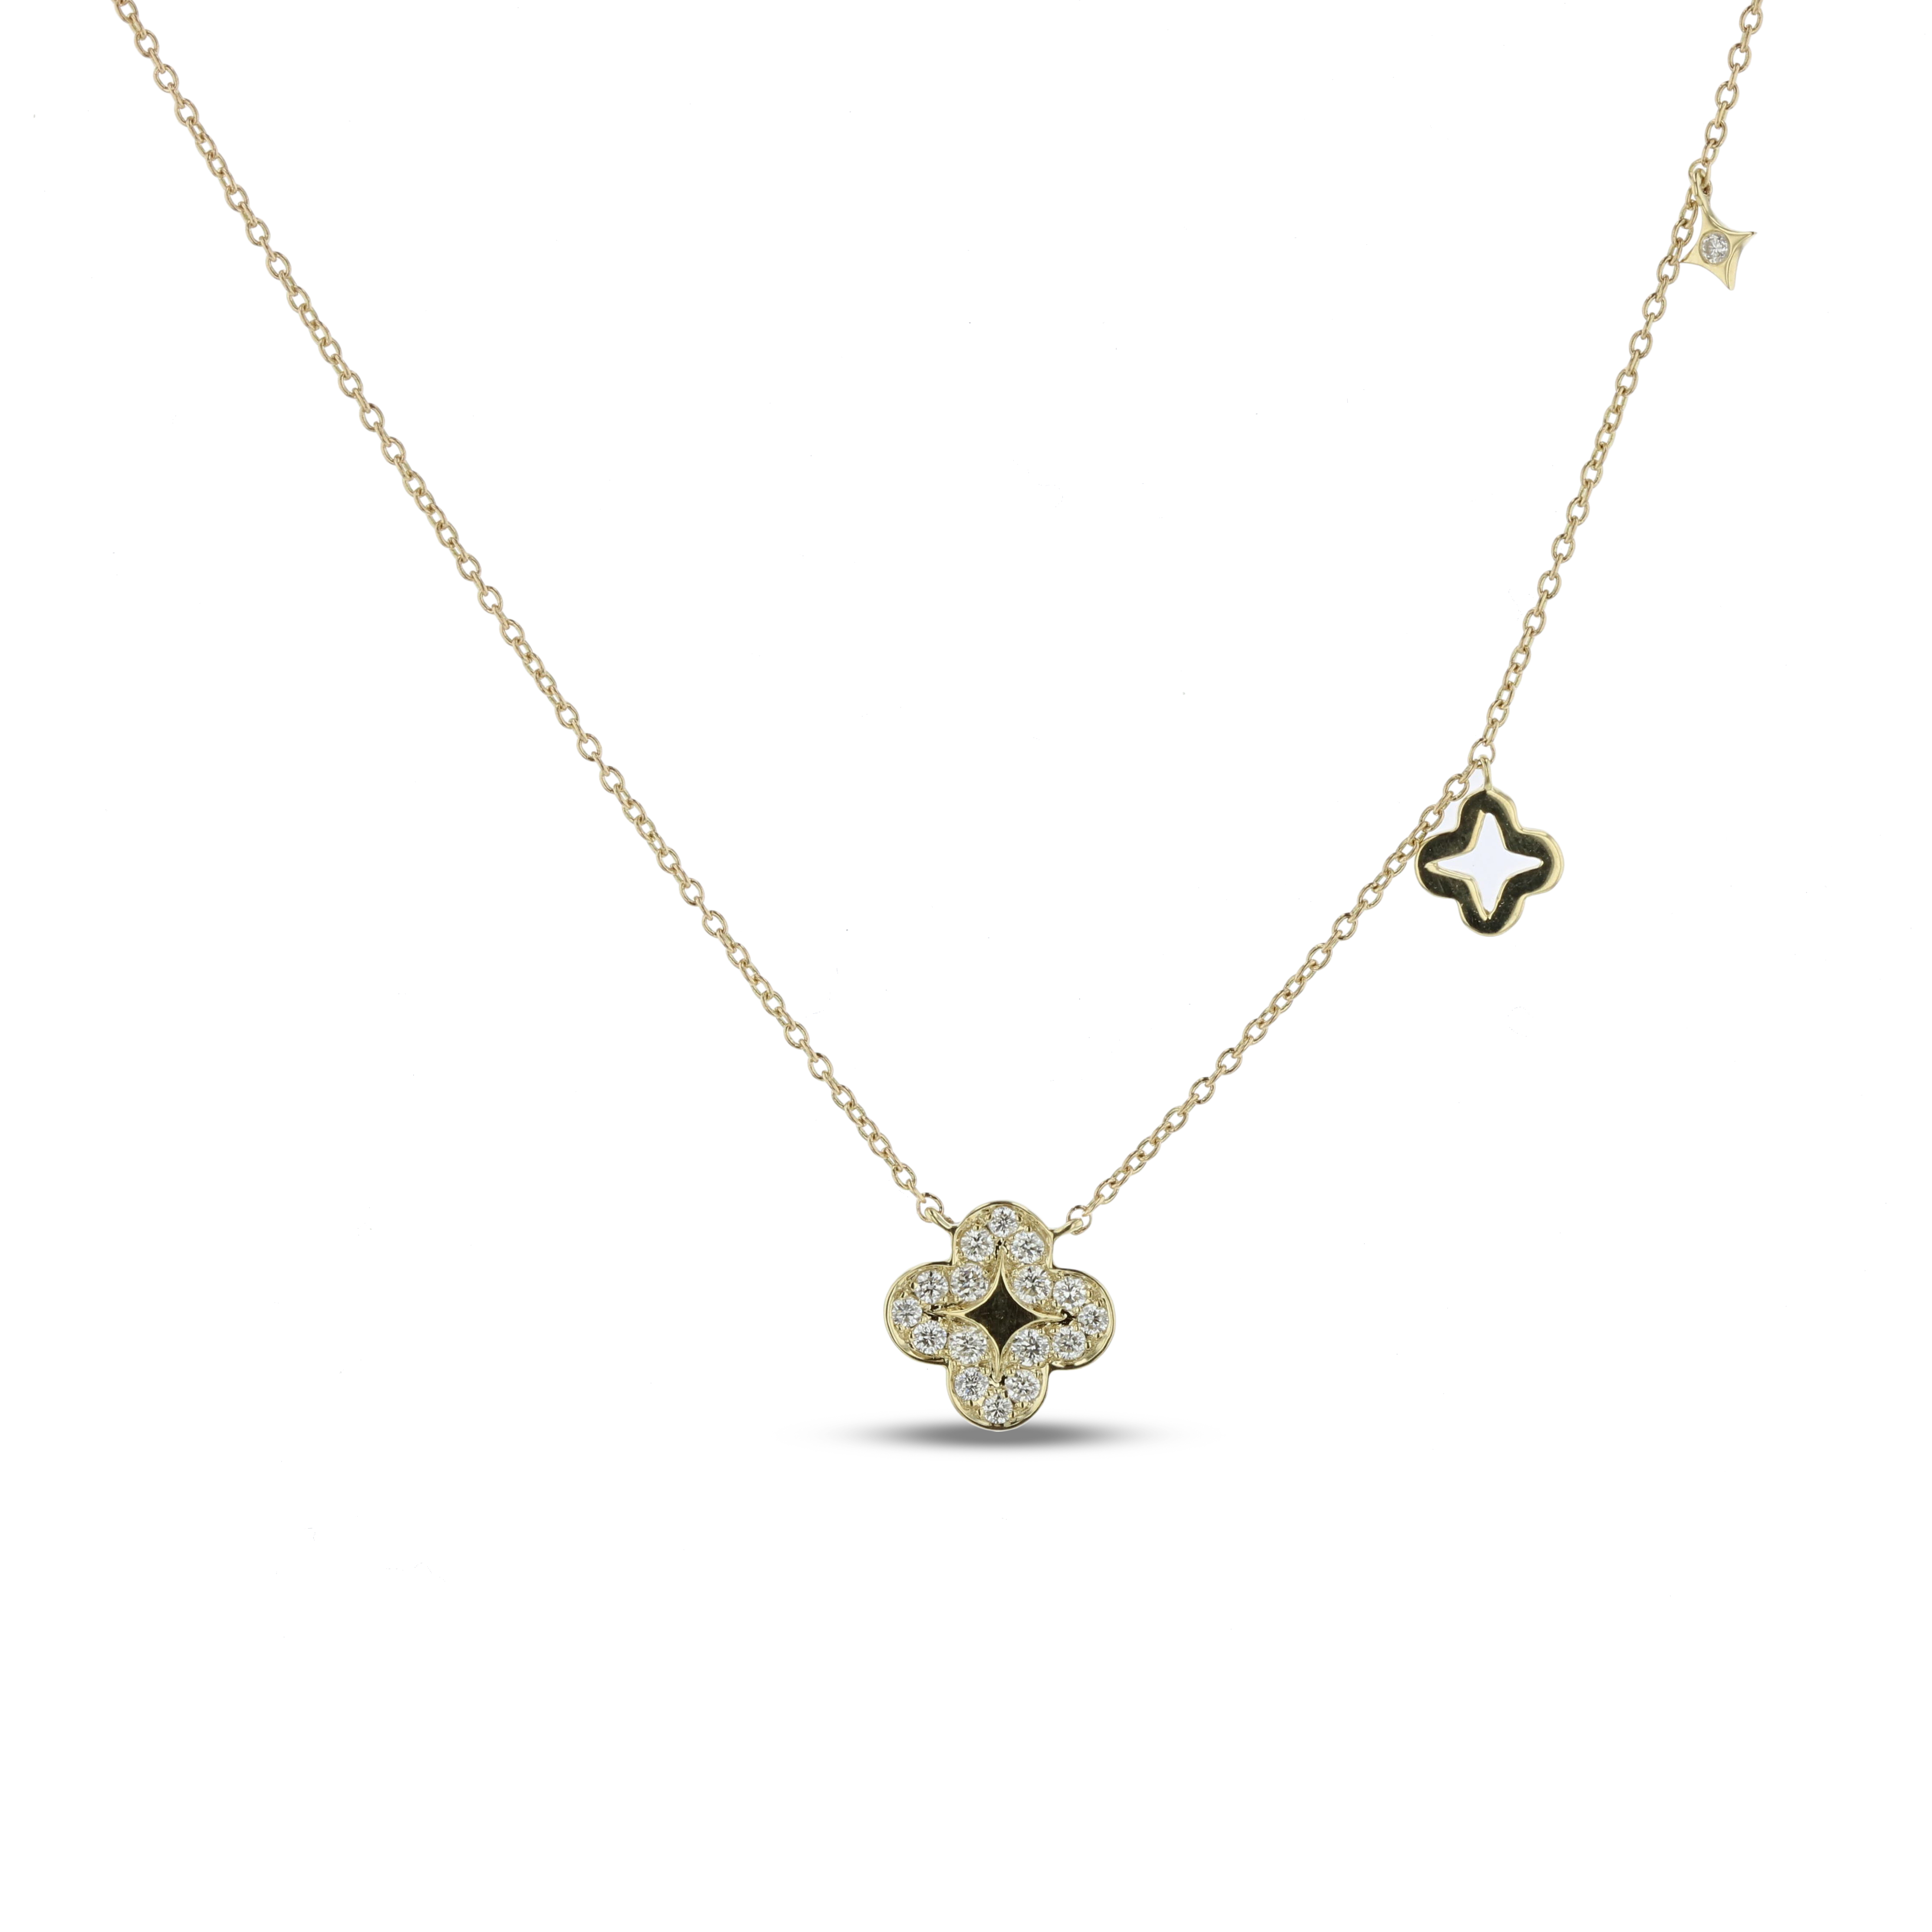 View 0.19ctw Diamond Clover Necklace in 14k Yellow Gold